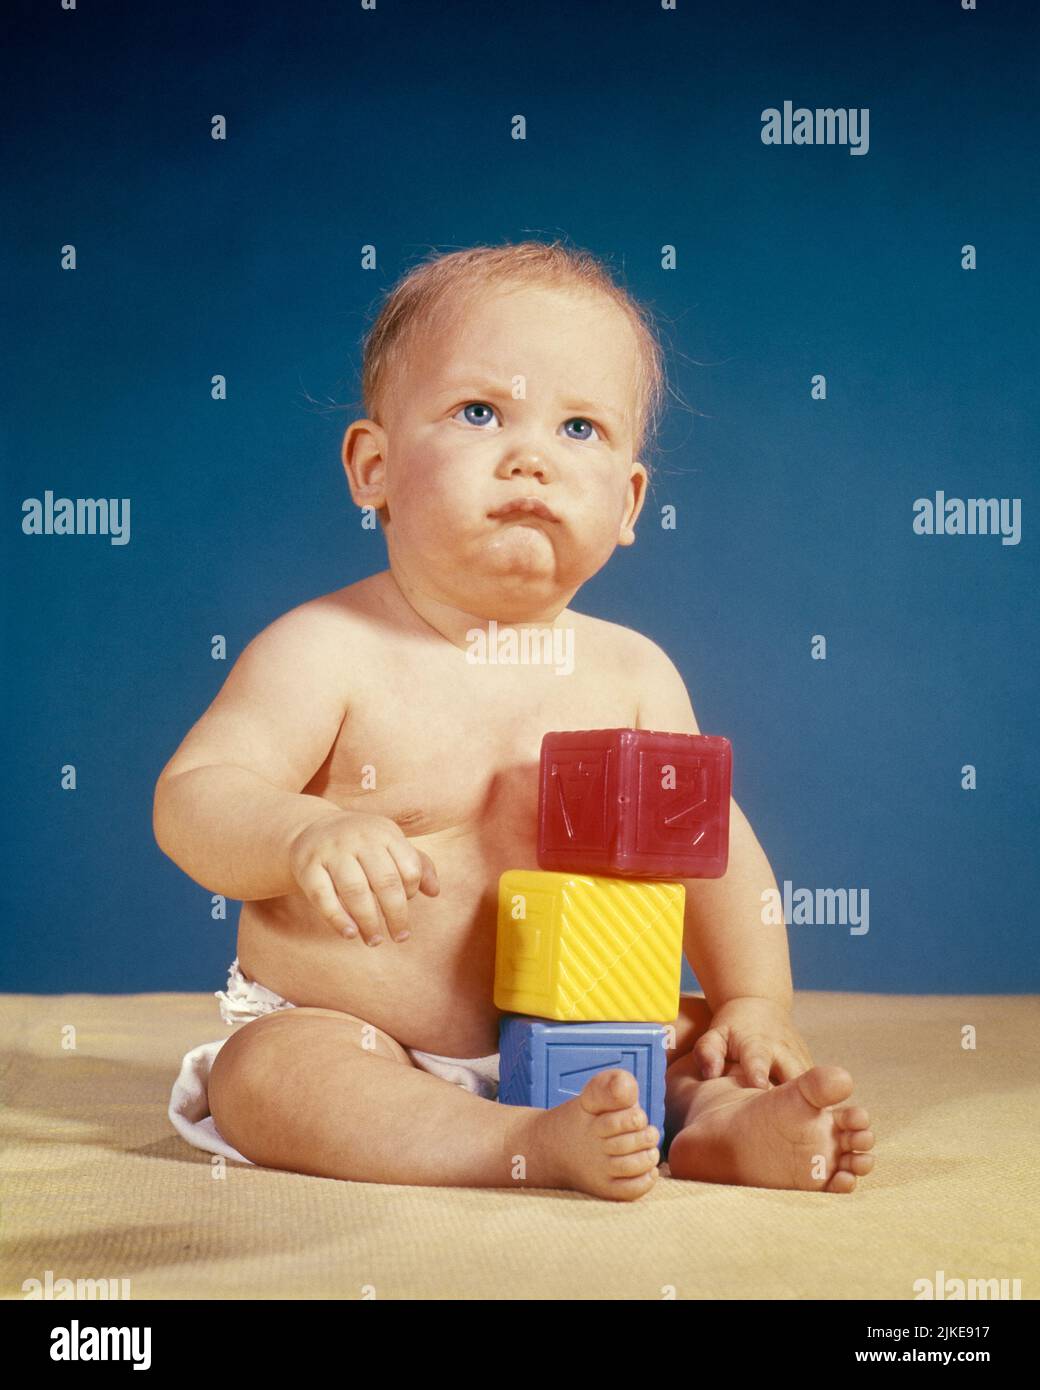 1950s UNHAPPY BABY BOY PLAYING WITH PLASTIC BUILDING BLOCKS LOOKING UP WITH GRUMPY FACIAL EXPRESSION - kb6071 HAR001 HARS COPY SPACE FULL-LENGTH MALES DIAPER EXPRESSIONS TROUBLED CONCERNED SADNESS EYE CONTACT STACKING RECREATION UP MOOD CONCEPTUAL GLUM BABY BOY SOURPUSS DISGRUNTLED JUVENILES MISERABLE CAUCASIAN ETHNICITY HAR001 OLD FASHIONED Stock Photo